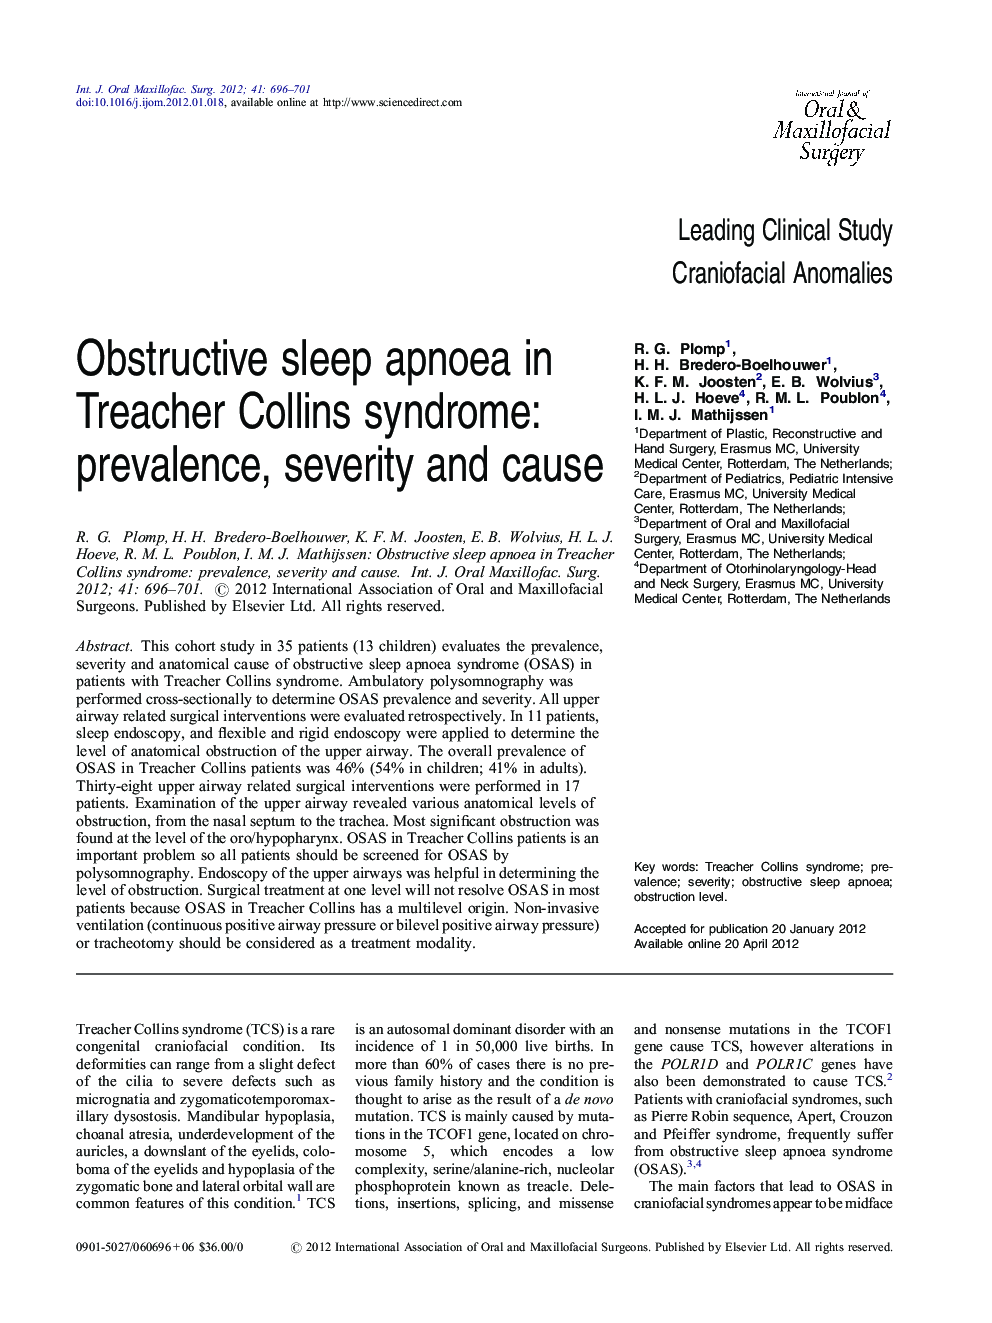 Obstructive sleep apnoea in Treacher Collins syndrome: prevalence, severity and cause